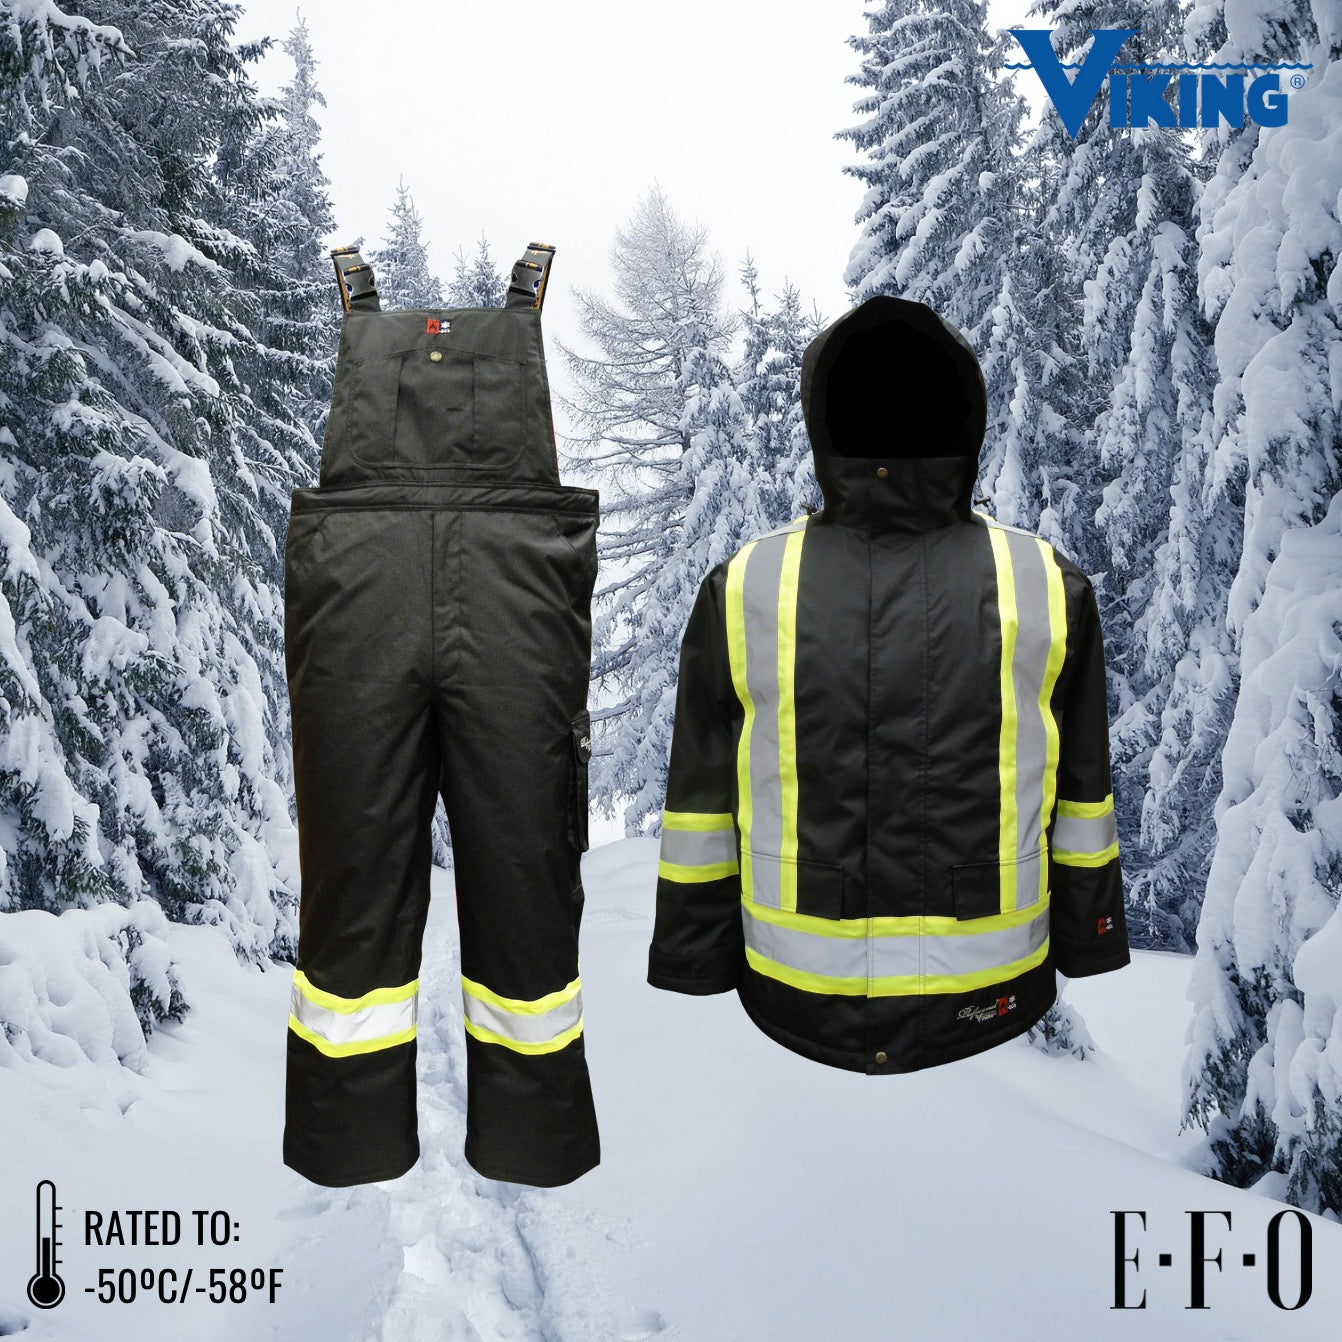 Viking FR Insulated Jacket -50°C RipStop